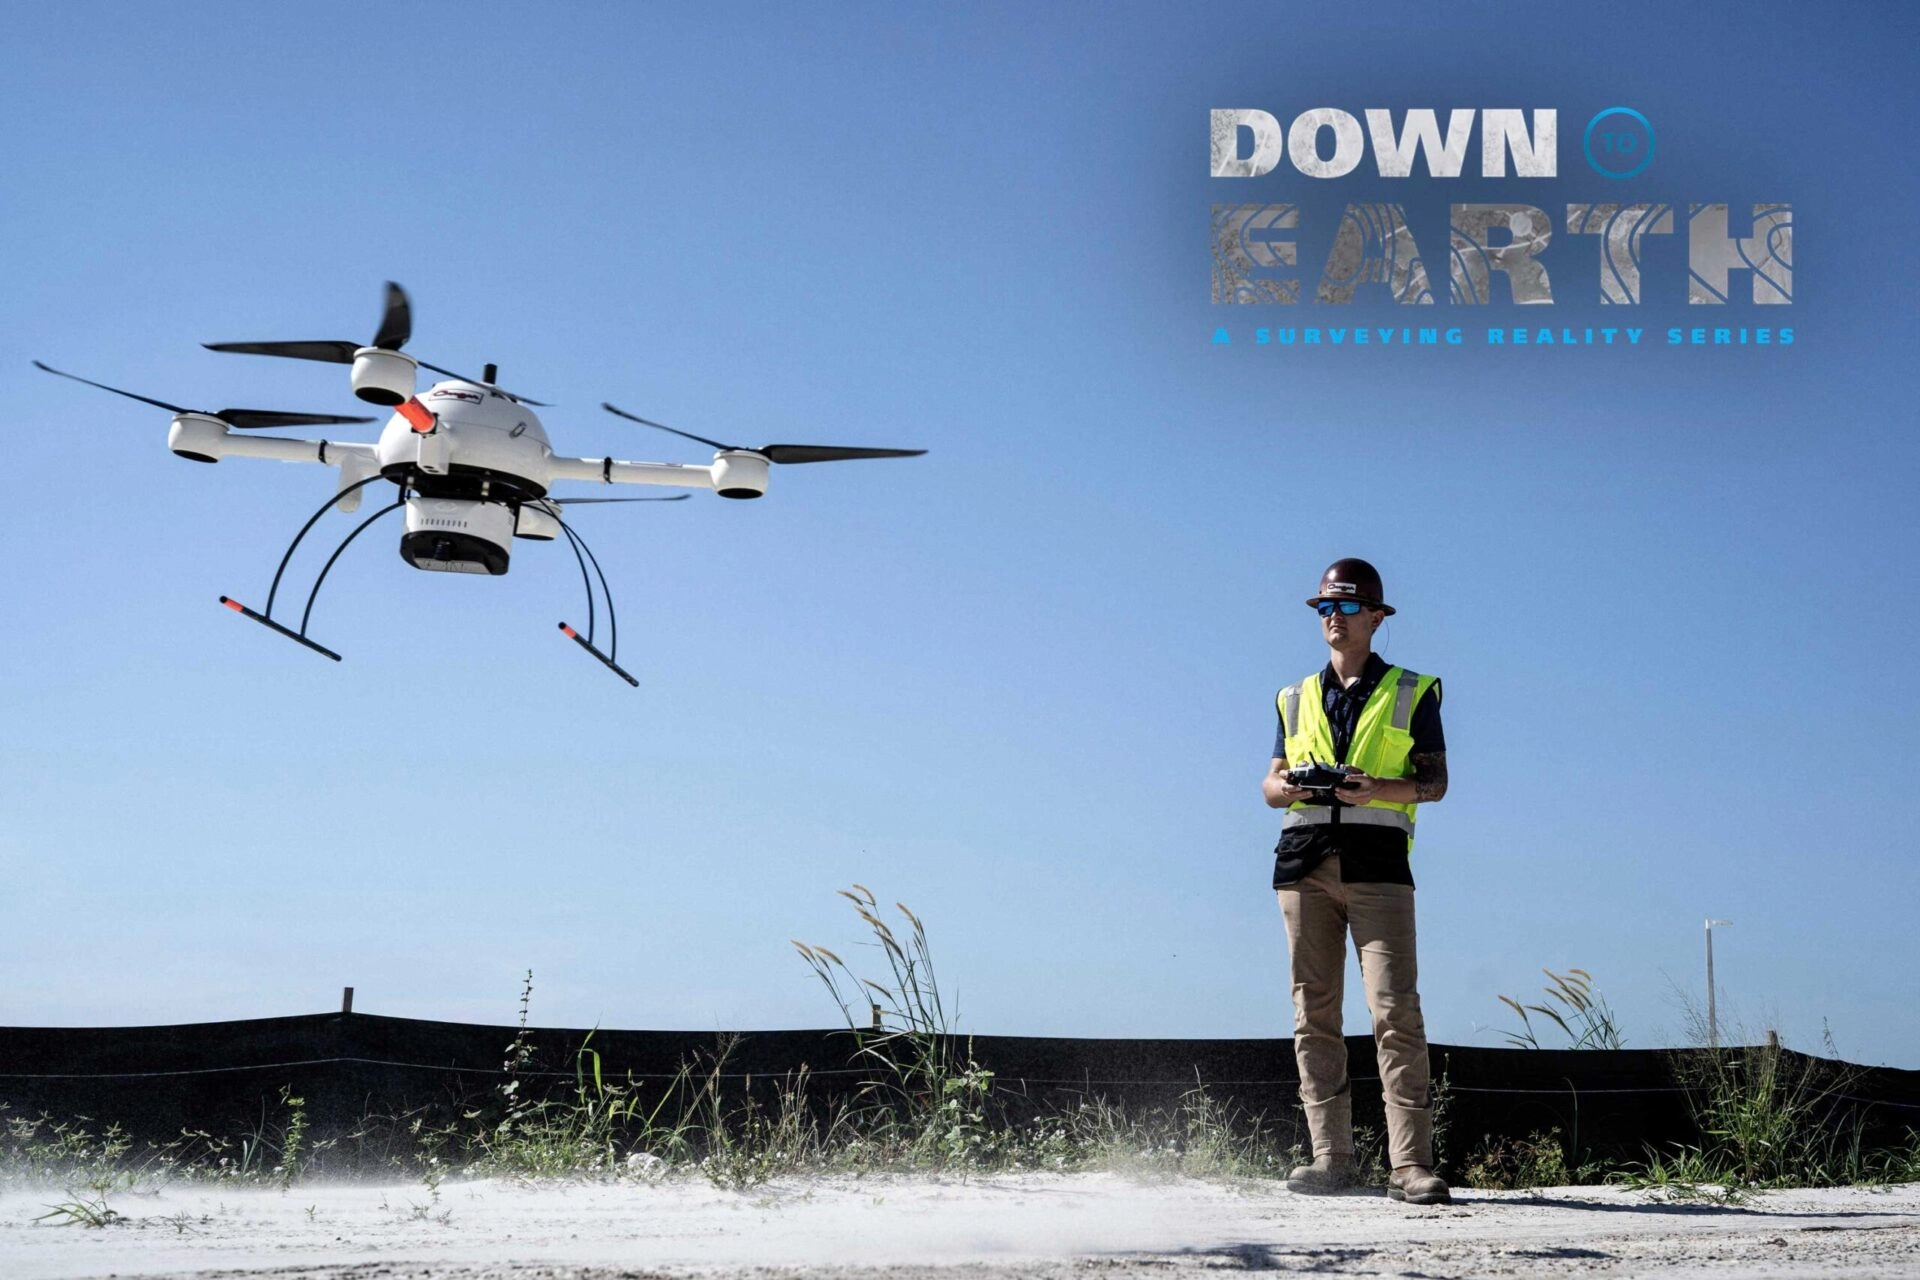 Drone LiDAR and Surveyor Reality Series, Down to Earth, Returns with New Construction Episodes